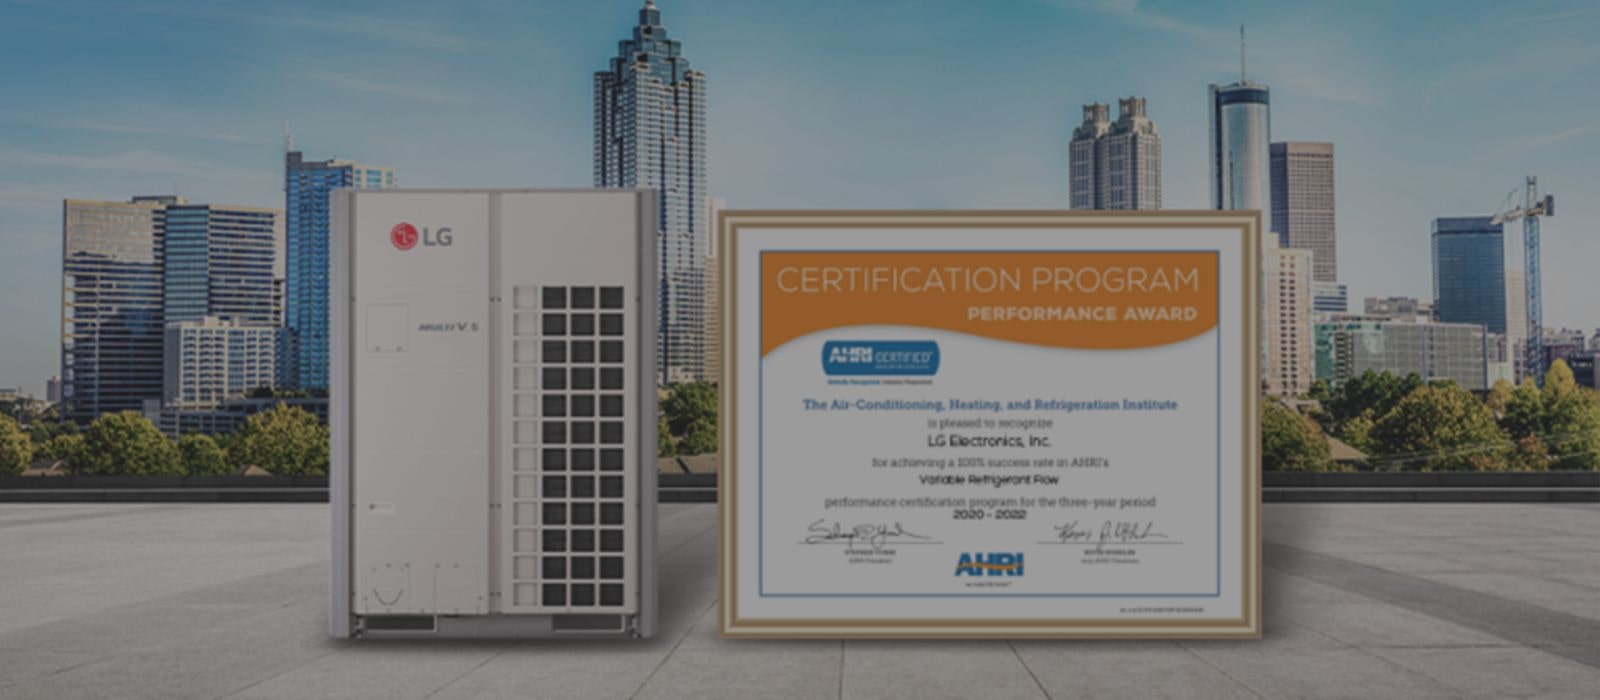 LG Recognized With AHRI Performance Award for Sixth Consecutive Year1